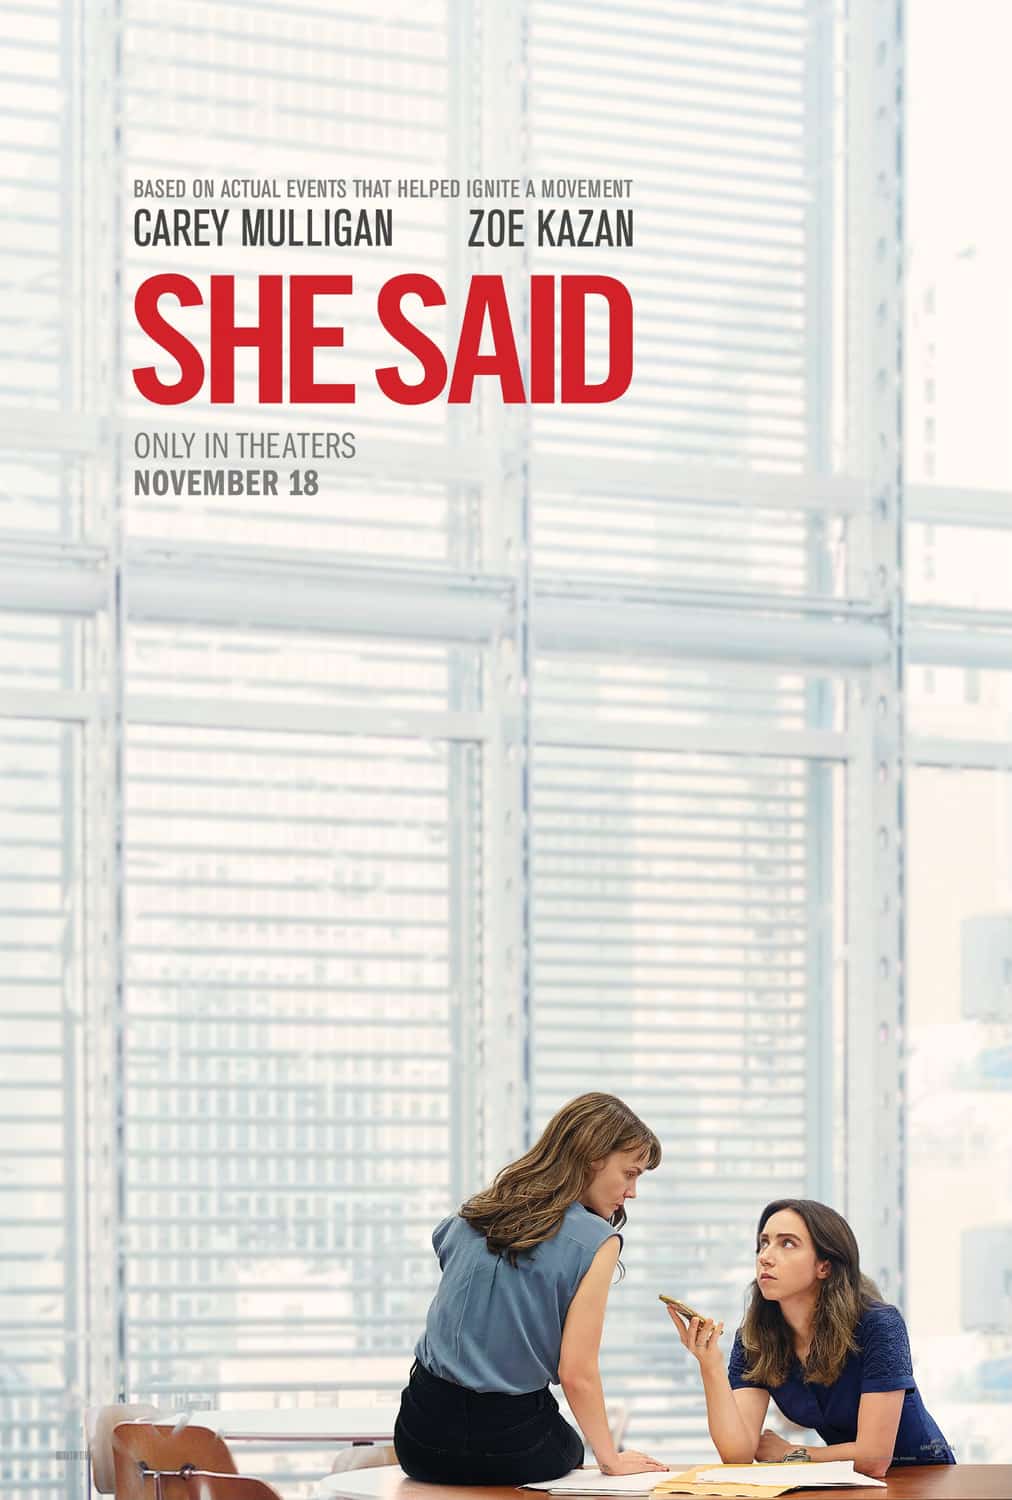 This weeks UK new movie preview 25th November 2022 - She Said, Disenchanted, Glass Onion: A Knives Out Mystery, Three Day Millionaire, Strange World, Matilda: The Musical and Bones and All